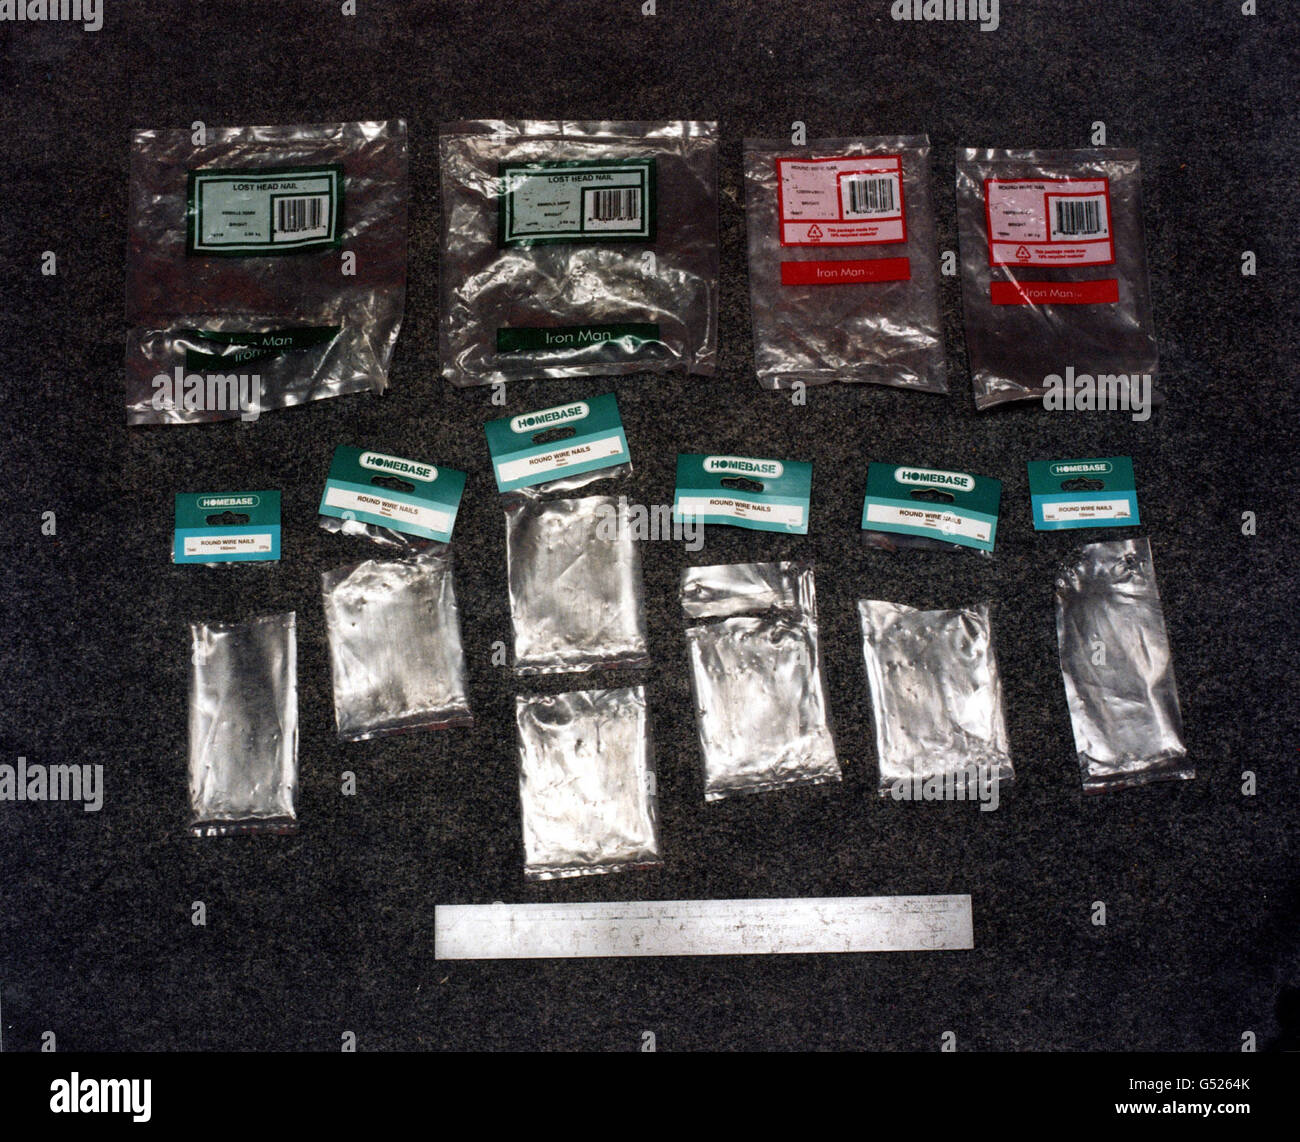 Metropolitan police issued picture showing nail bags found in David Copeland's bedroom. At the end of a 4 week trial at the Old Bailey, Copeland, an engineer from Farnborough, was found guilty of causing explosions at Brixton, Brick Lane and Soho in April 1999. * injuring 129, was found guilty of the murders of Andrea Dykes, John Light and Nik Moore. Stock Photo